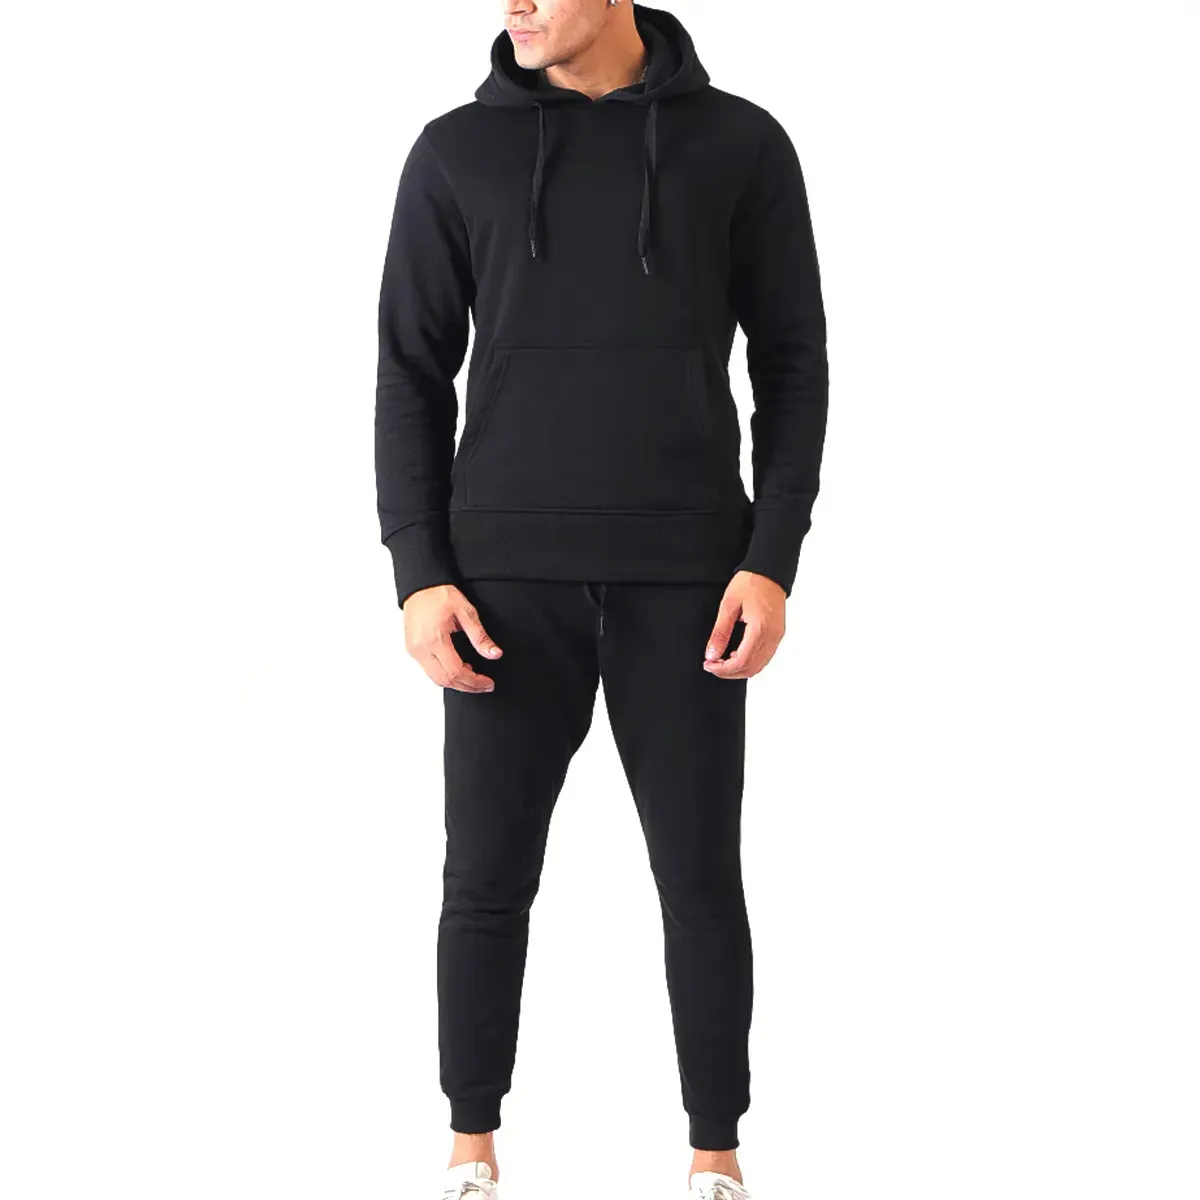 Branded Blank Customized logo men's sport tracksuits Training jogging wear two piece track suit set